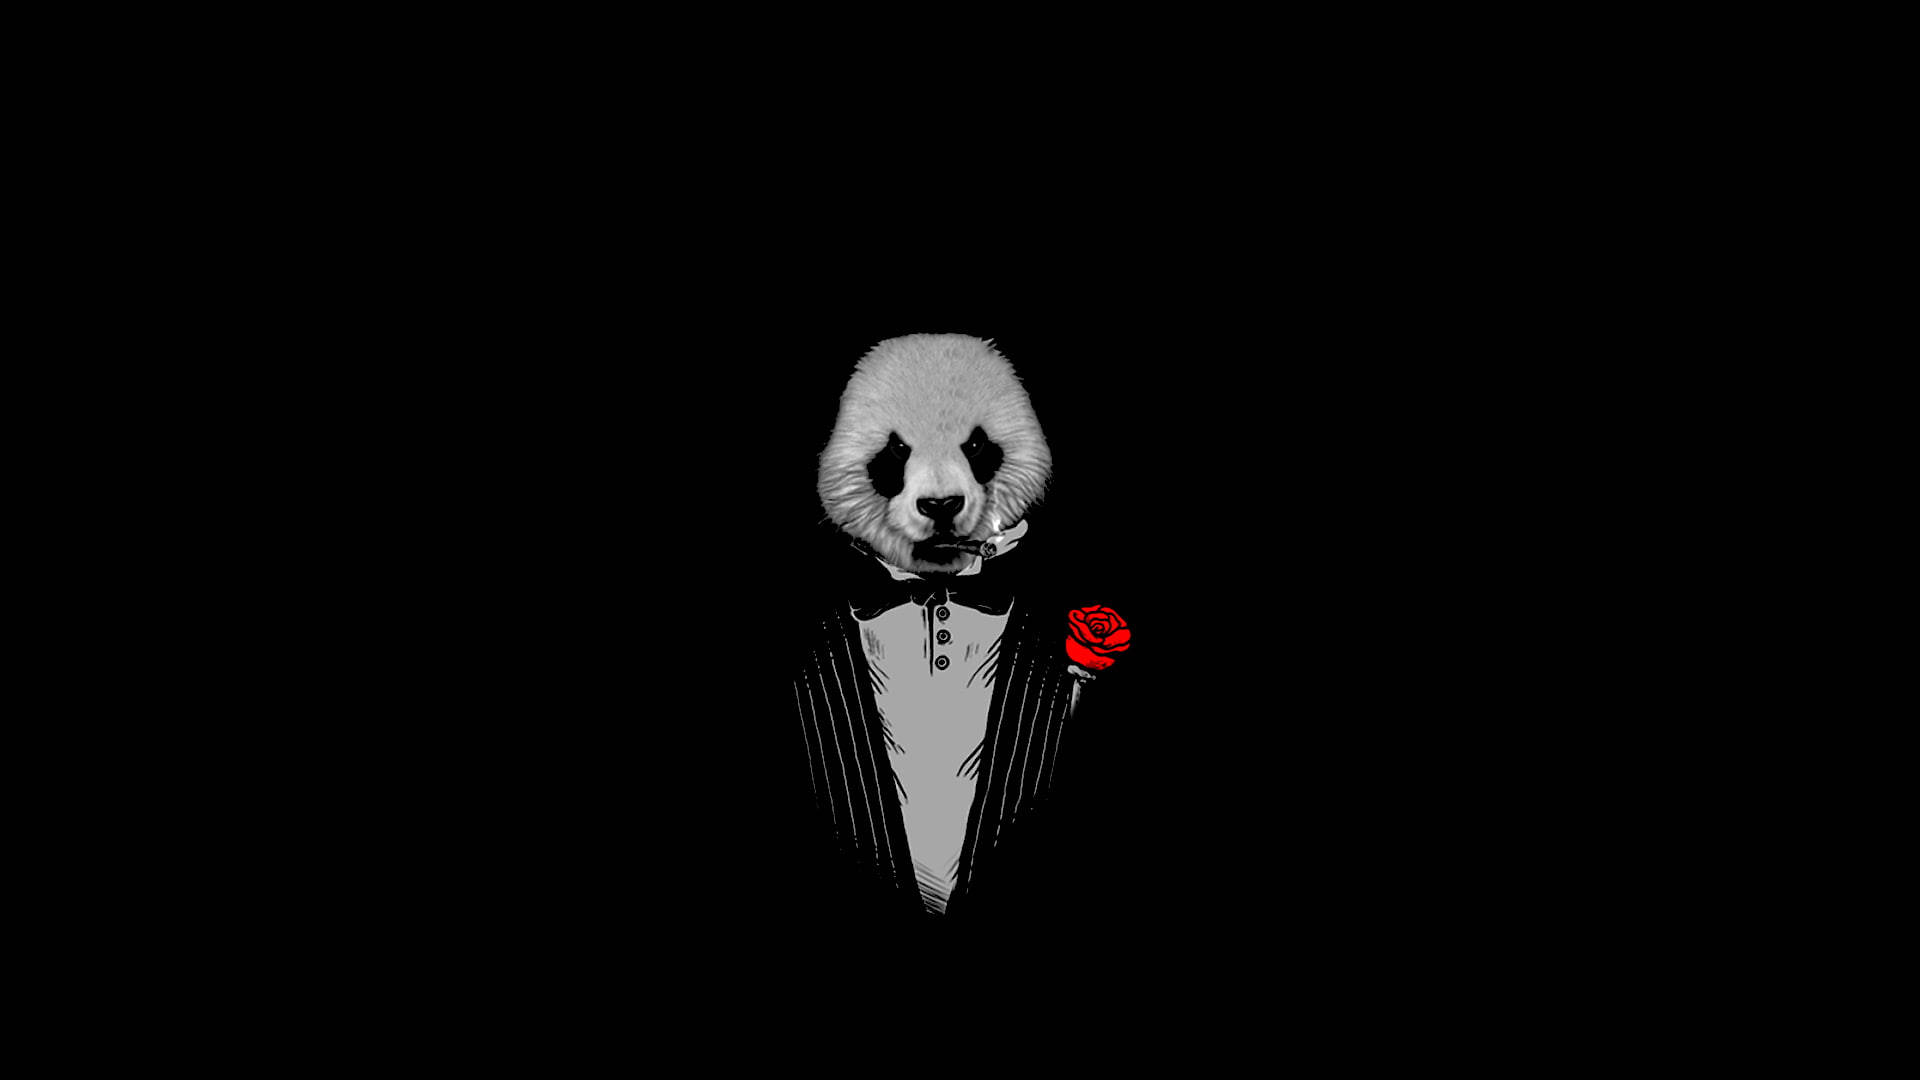 The Godfather Panda In Suit Background